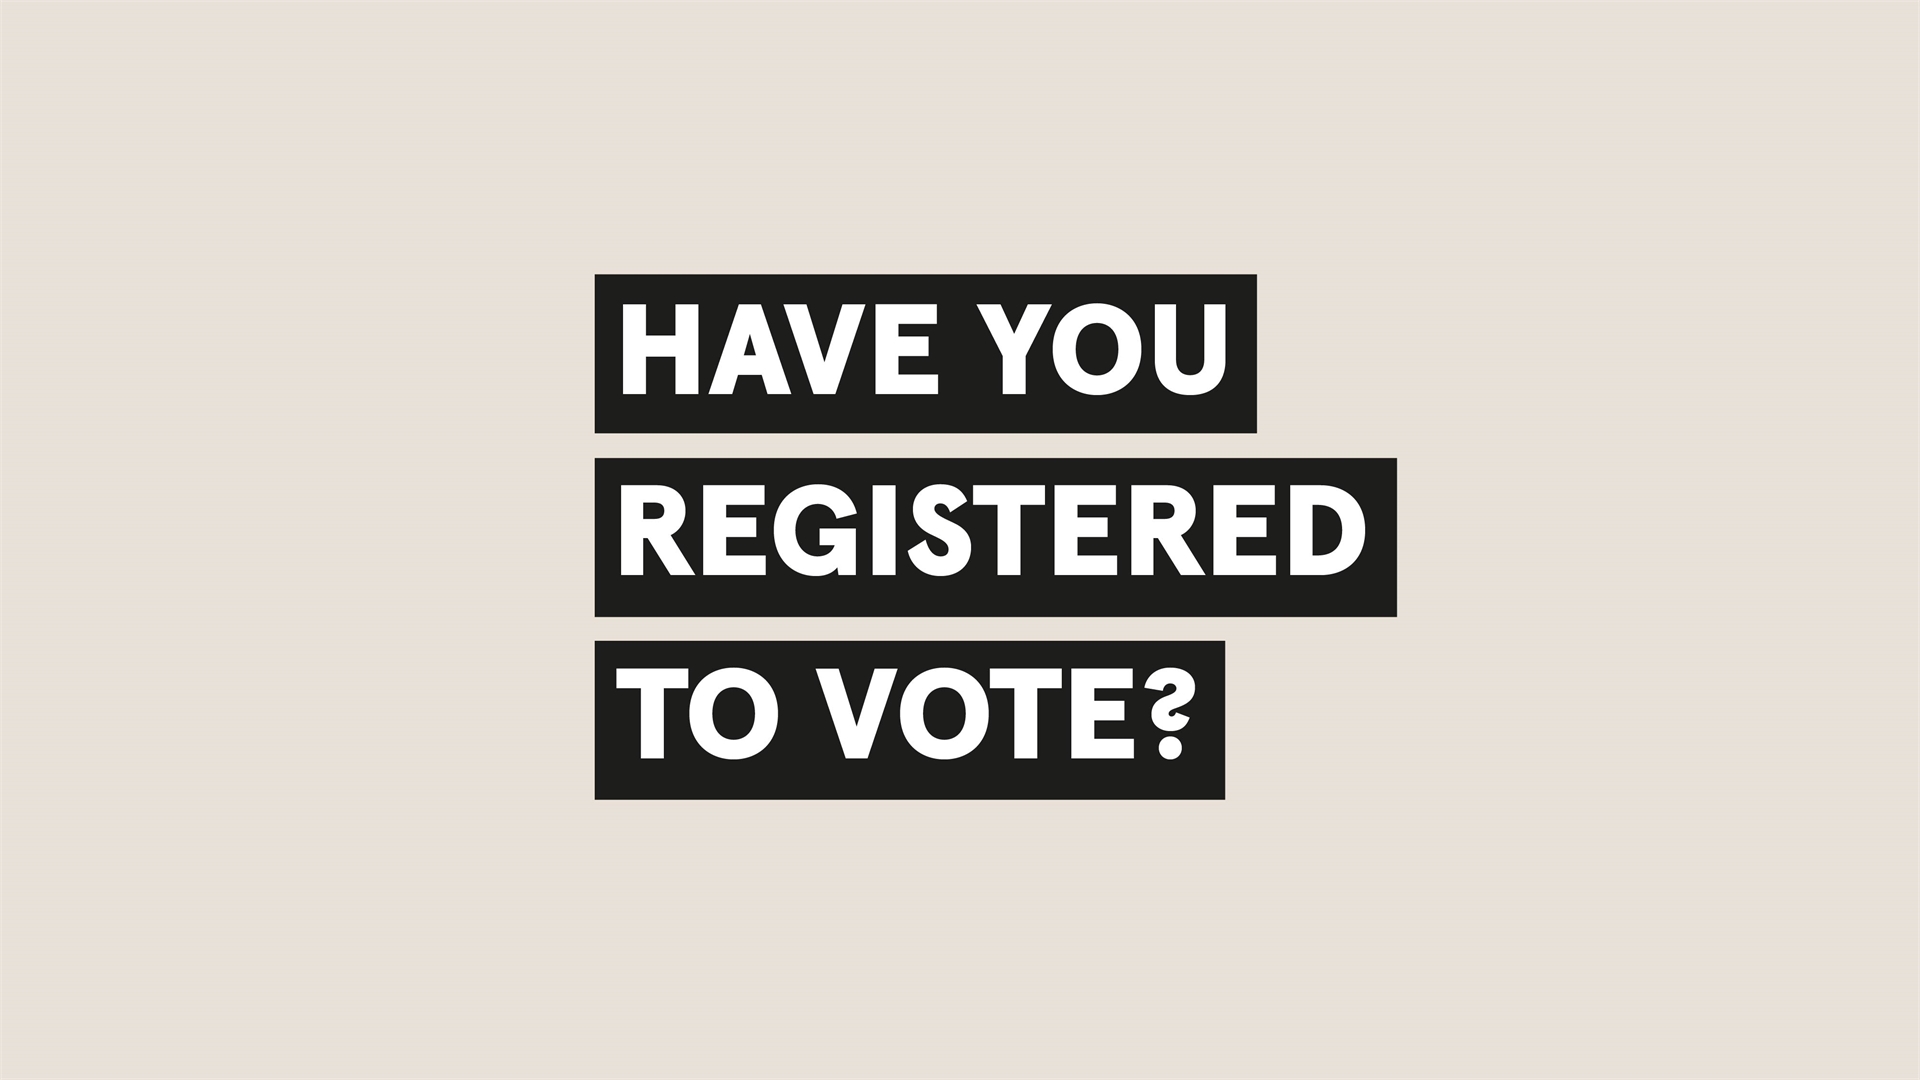 You need to be registered to vote before you are allowed to vote in elections or referendums in the UK.